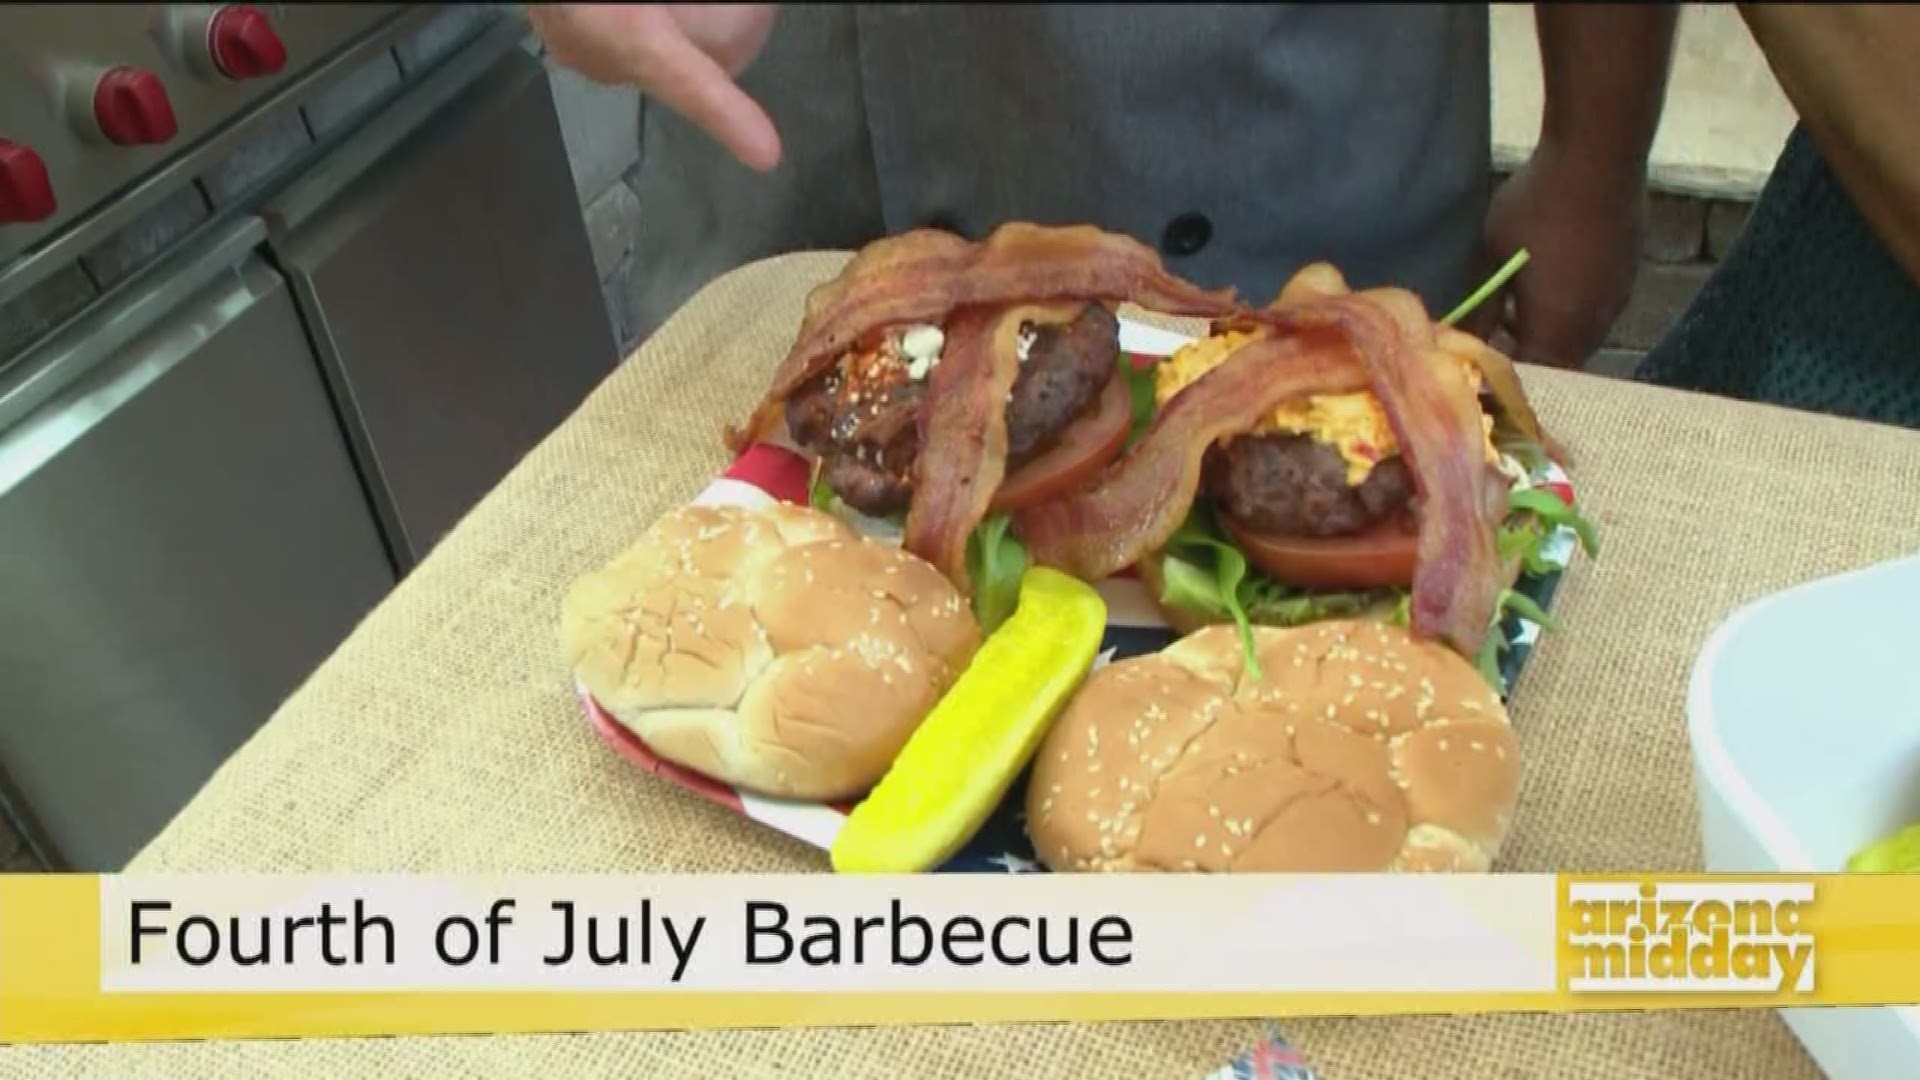 Don't eat boring burgers this Fourth of July! Chef William Turner is showing you how to spice up your barbecue.